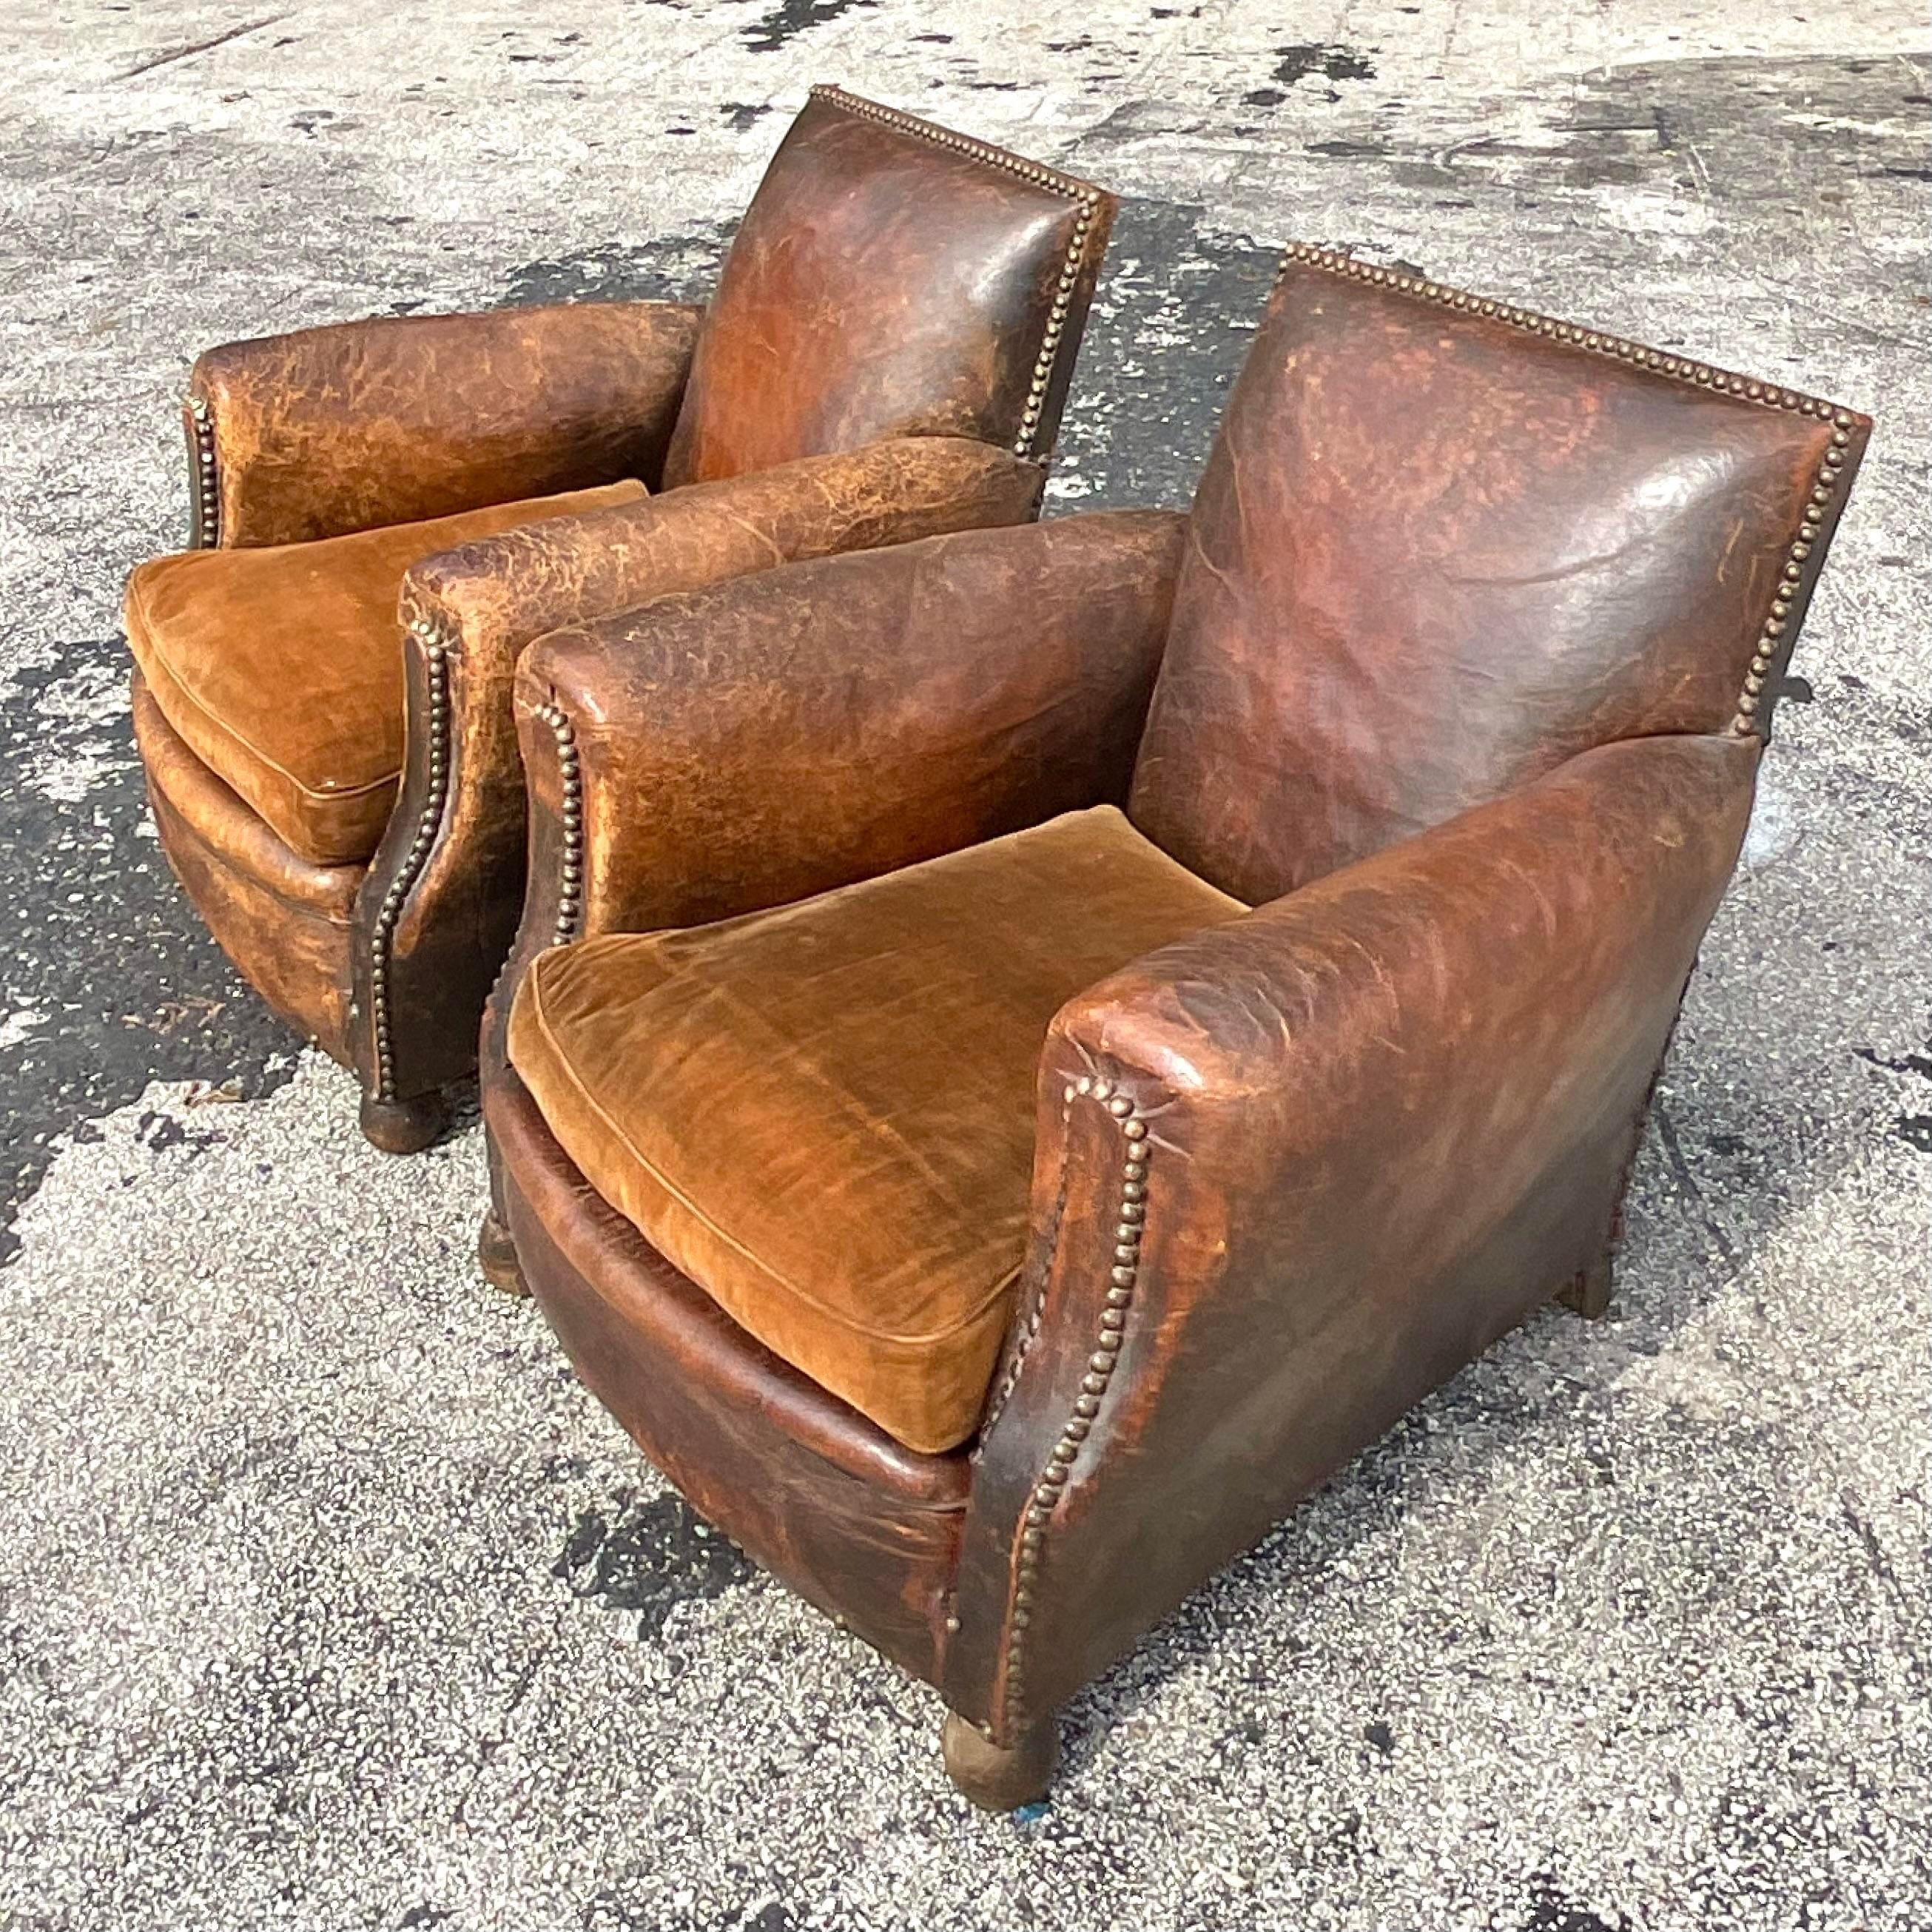 Vintage Boho Distressed French Art Deco Leather Club Chairs - a Pair For Sale 6